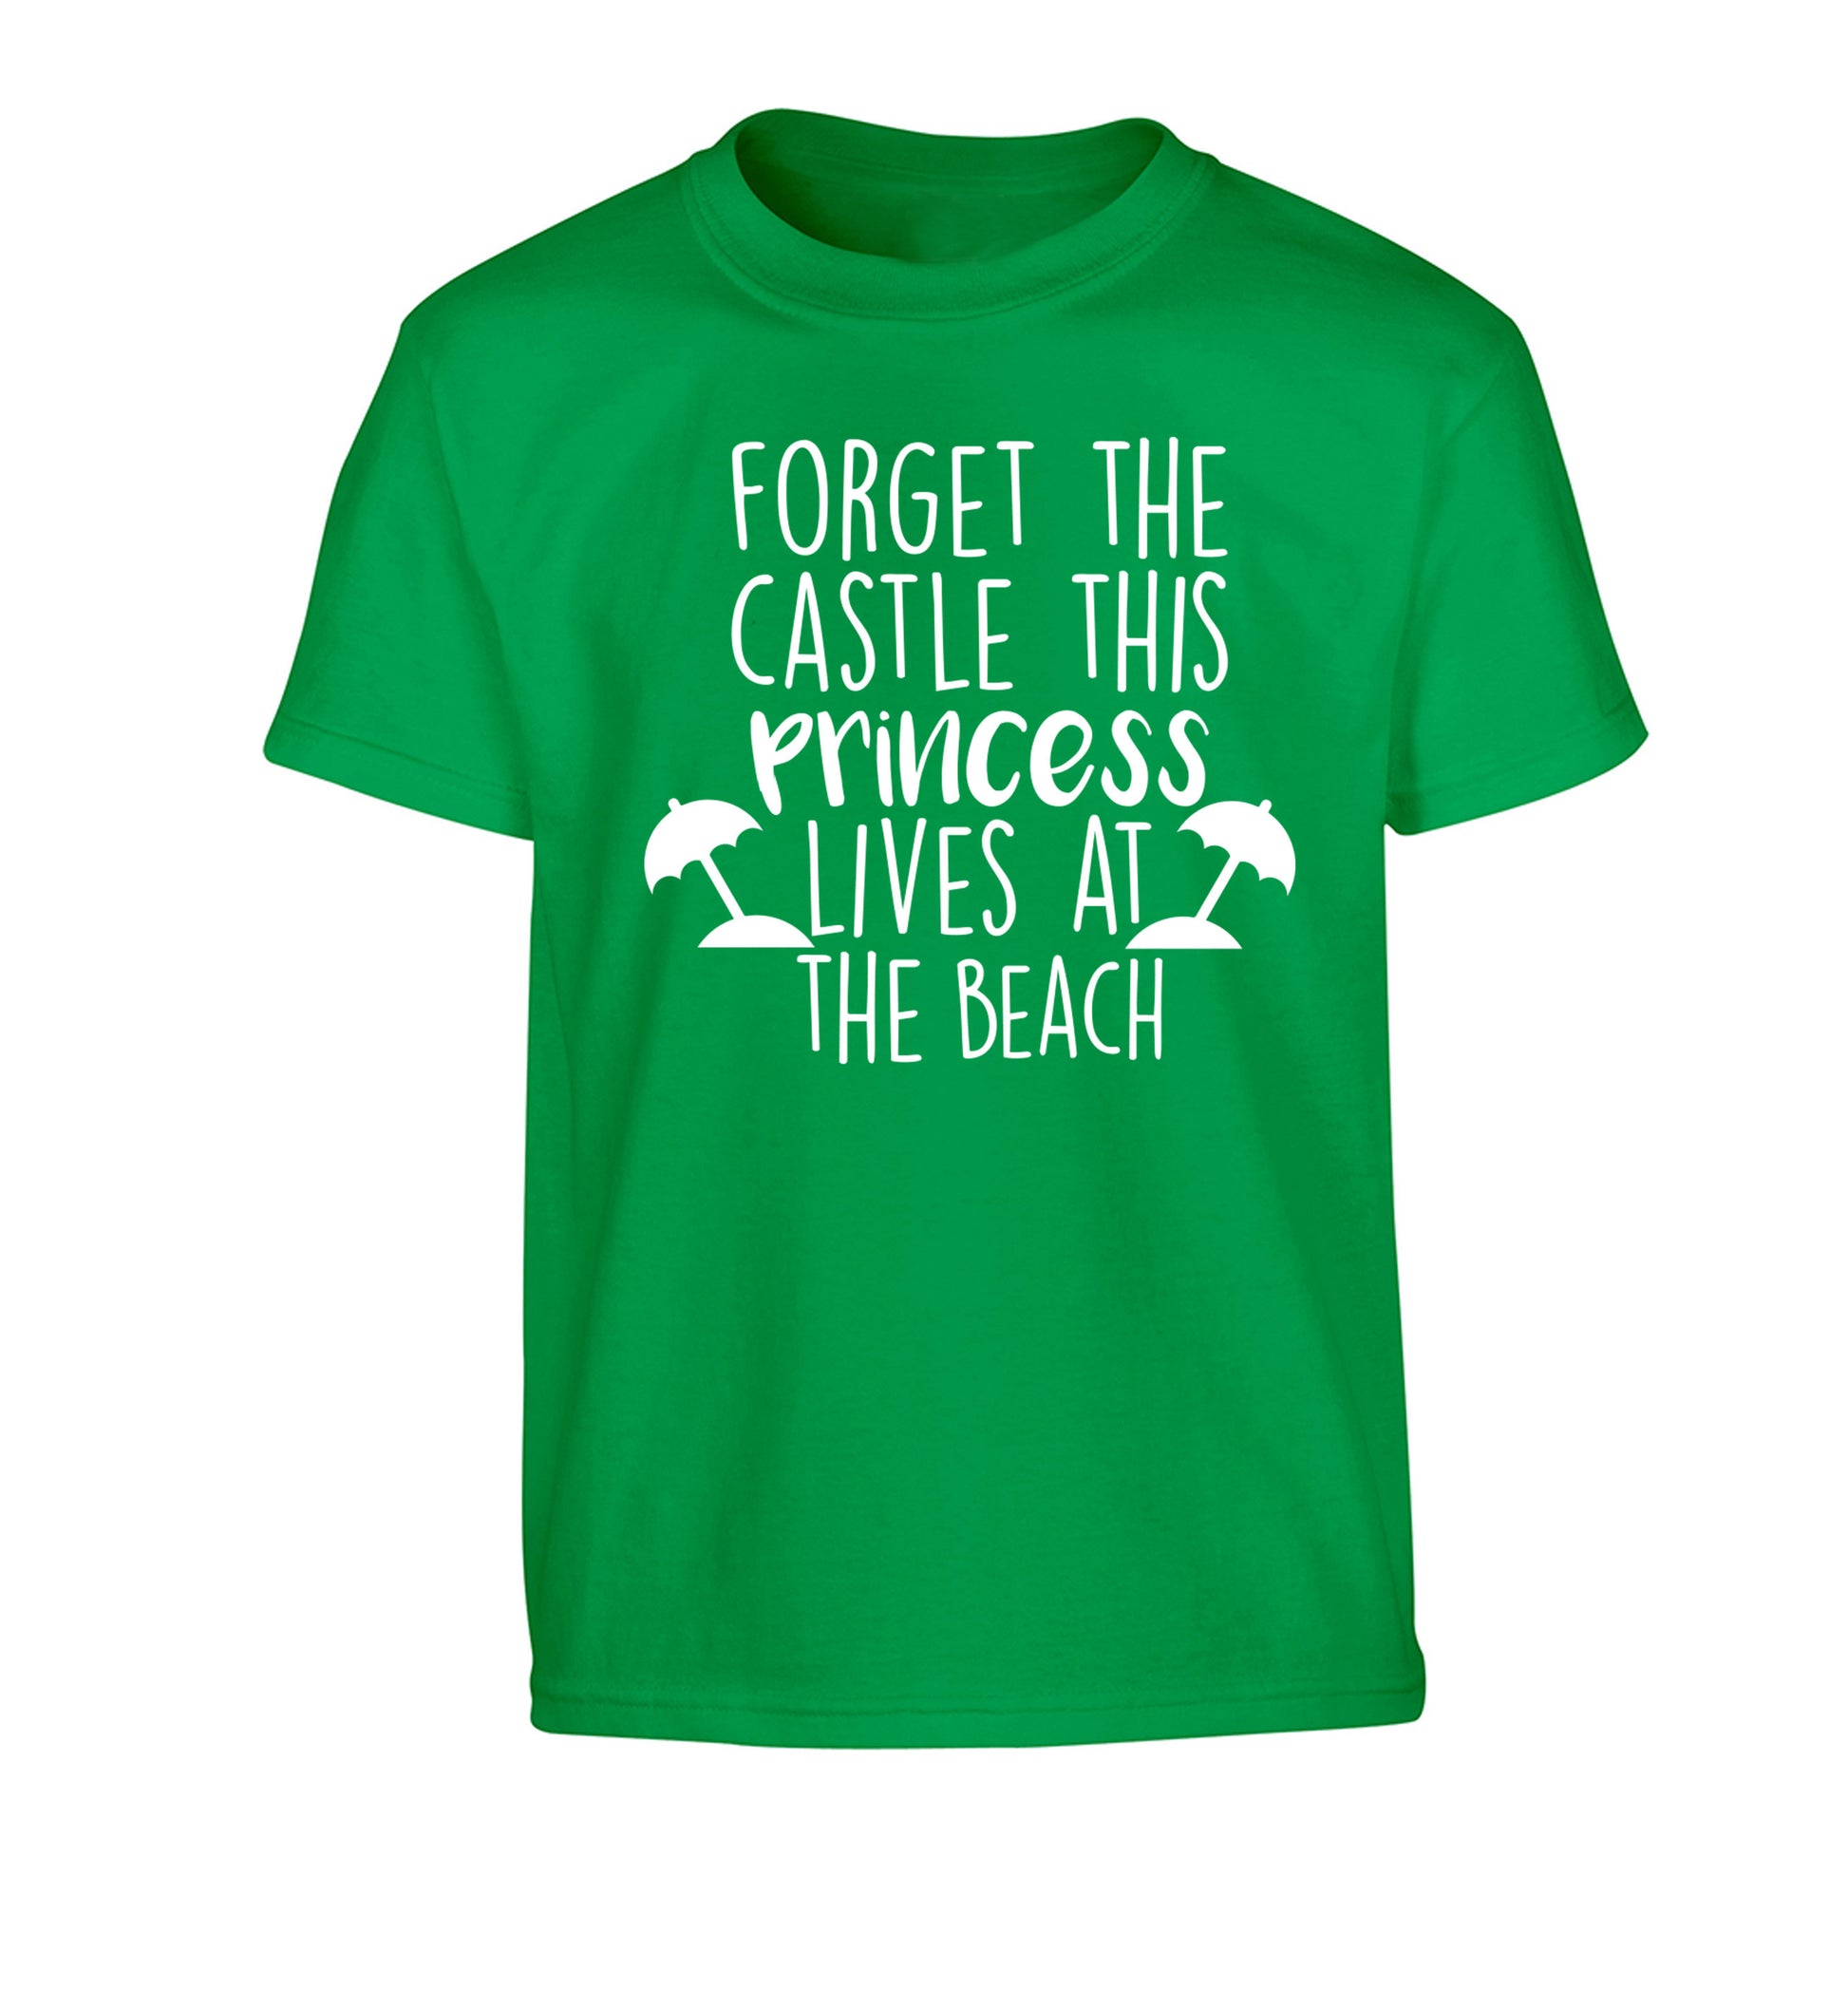 Forget the castle this princess lives at the beach Children's green Tshirt 12-14 Years